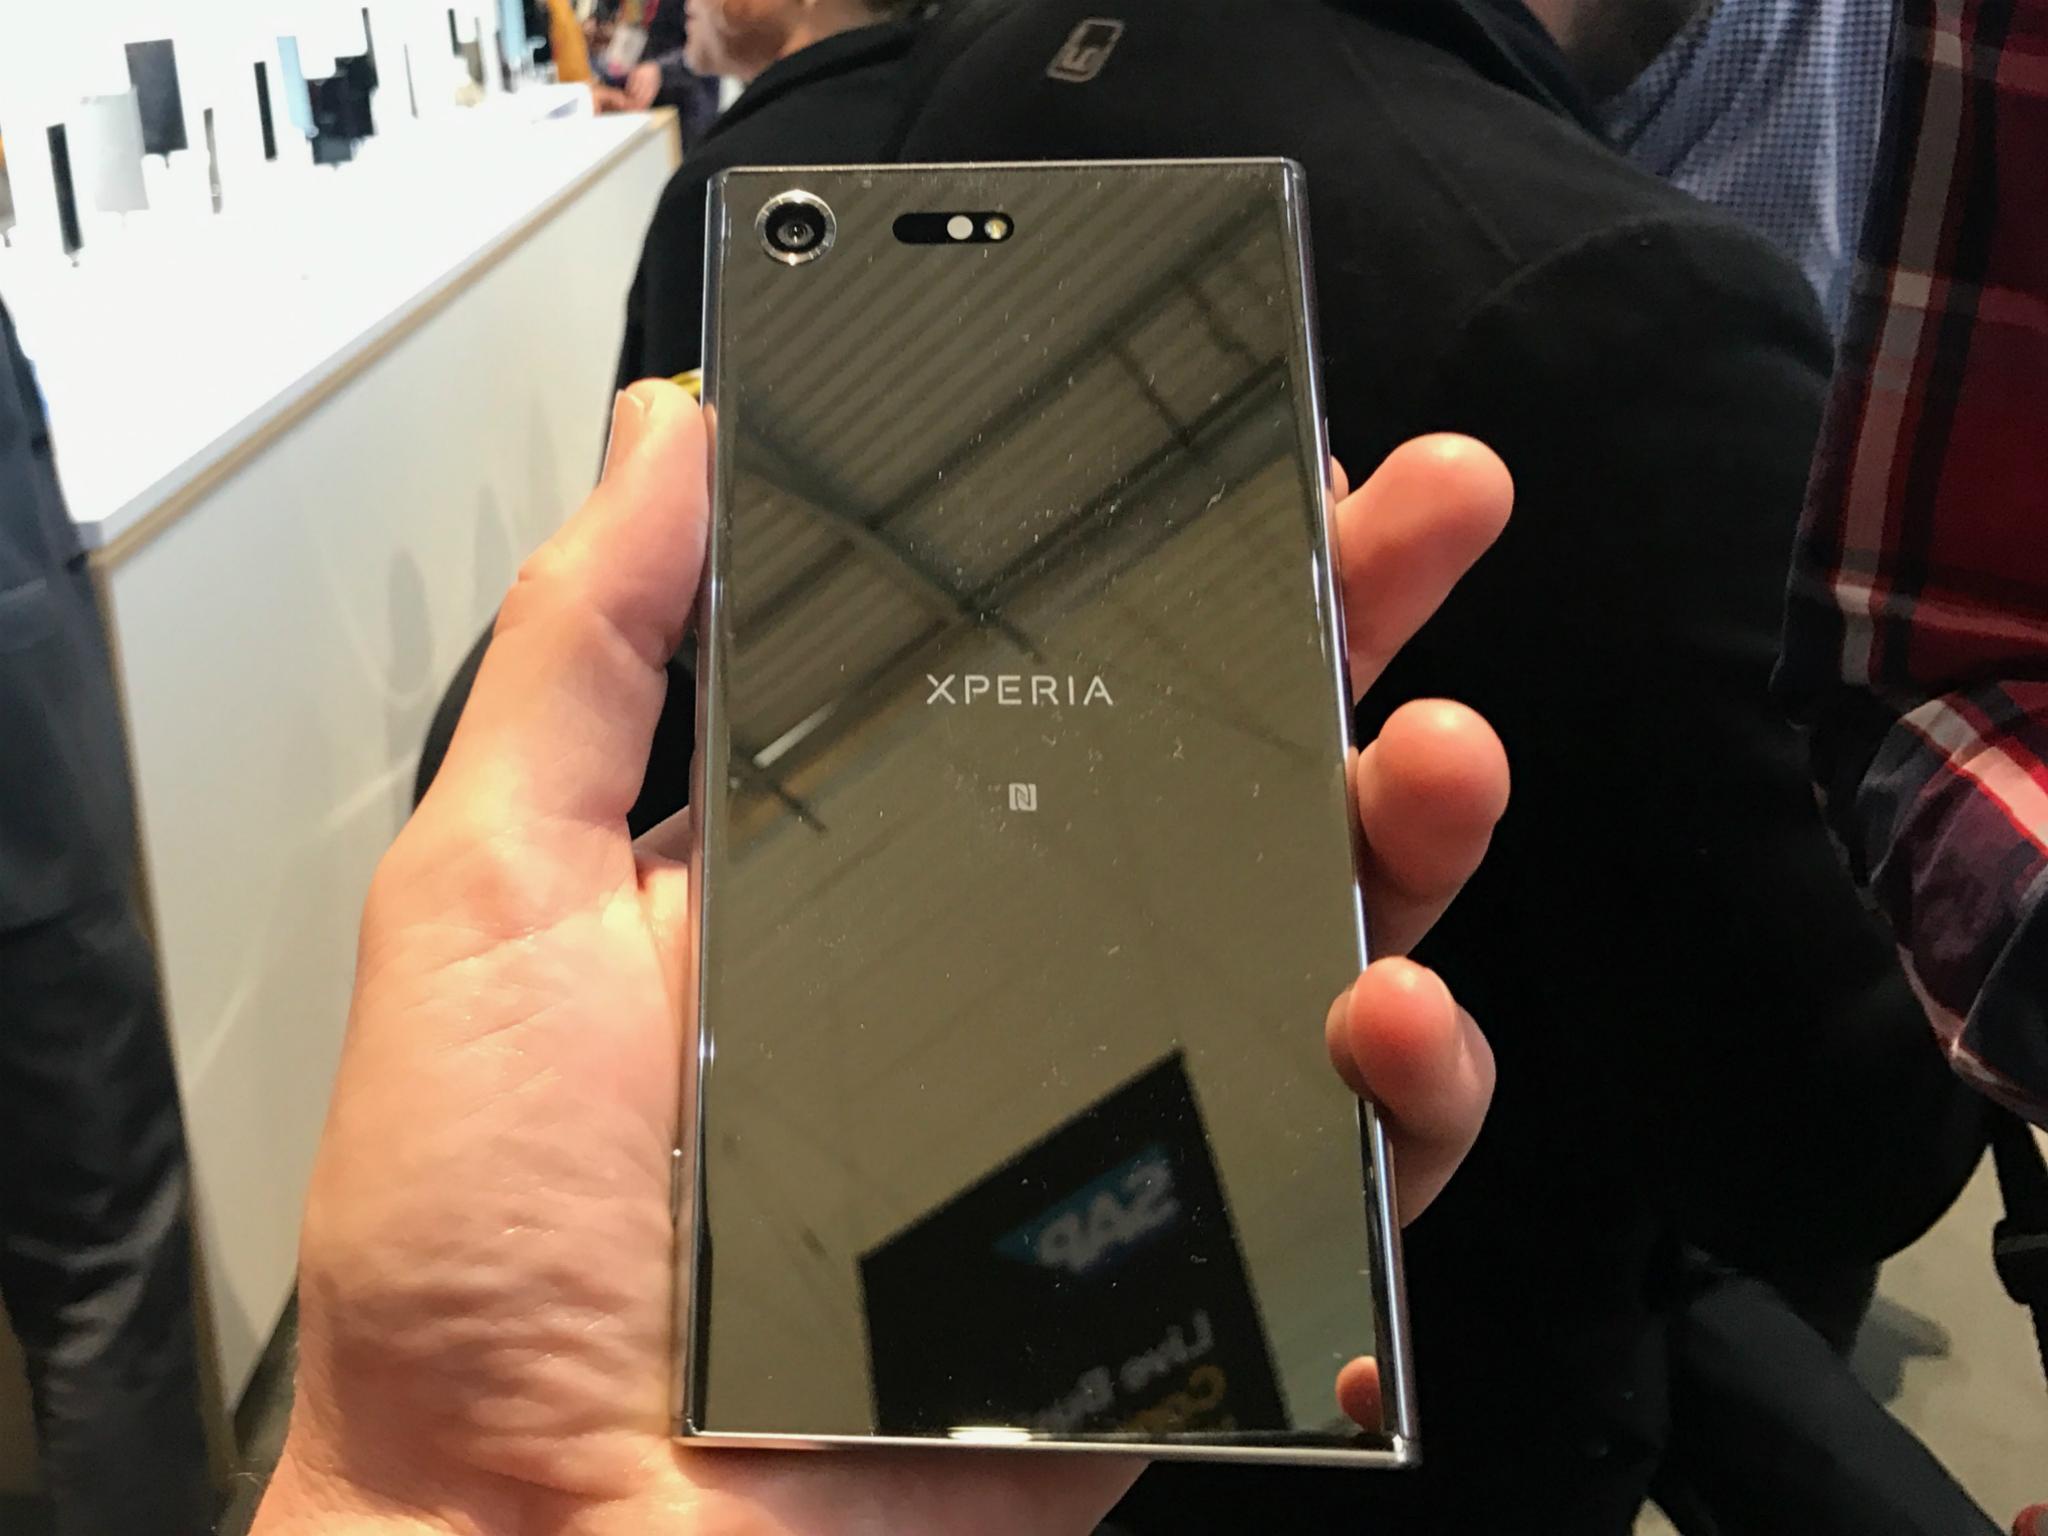 Sony Xperia Xz Premium Aims To Take On Iphone With